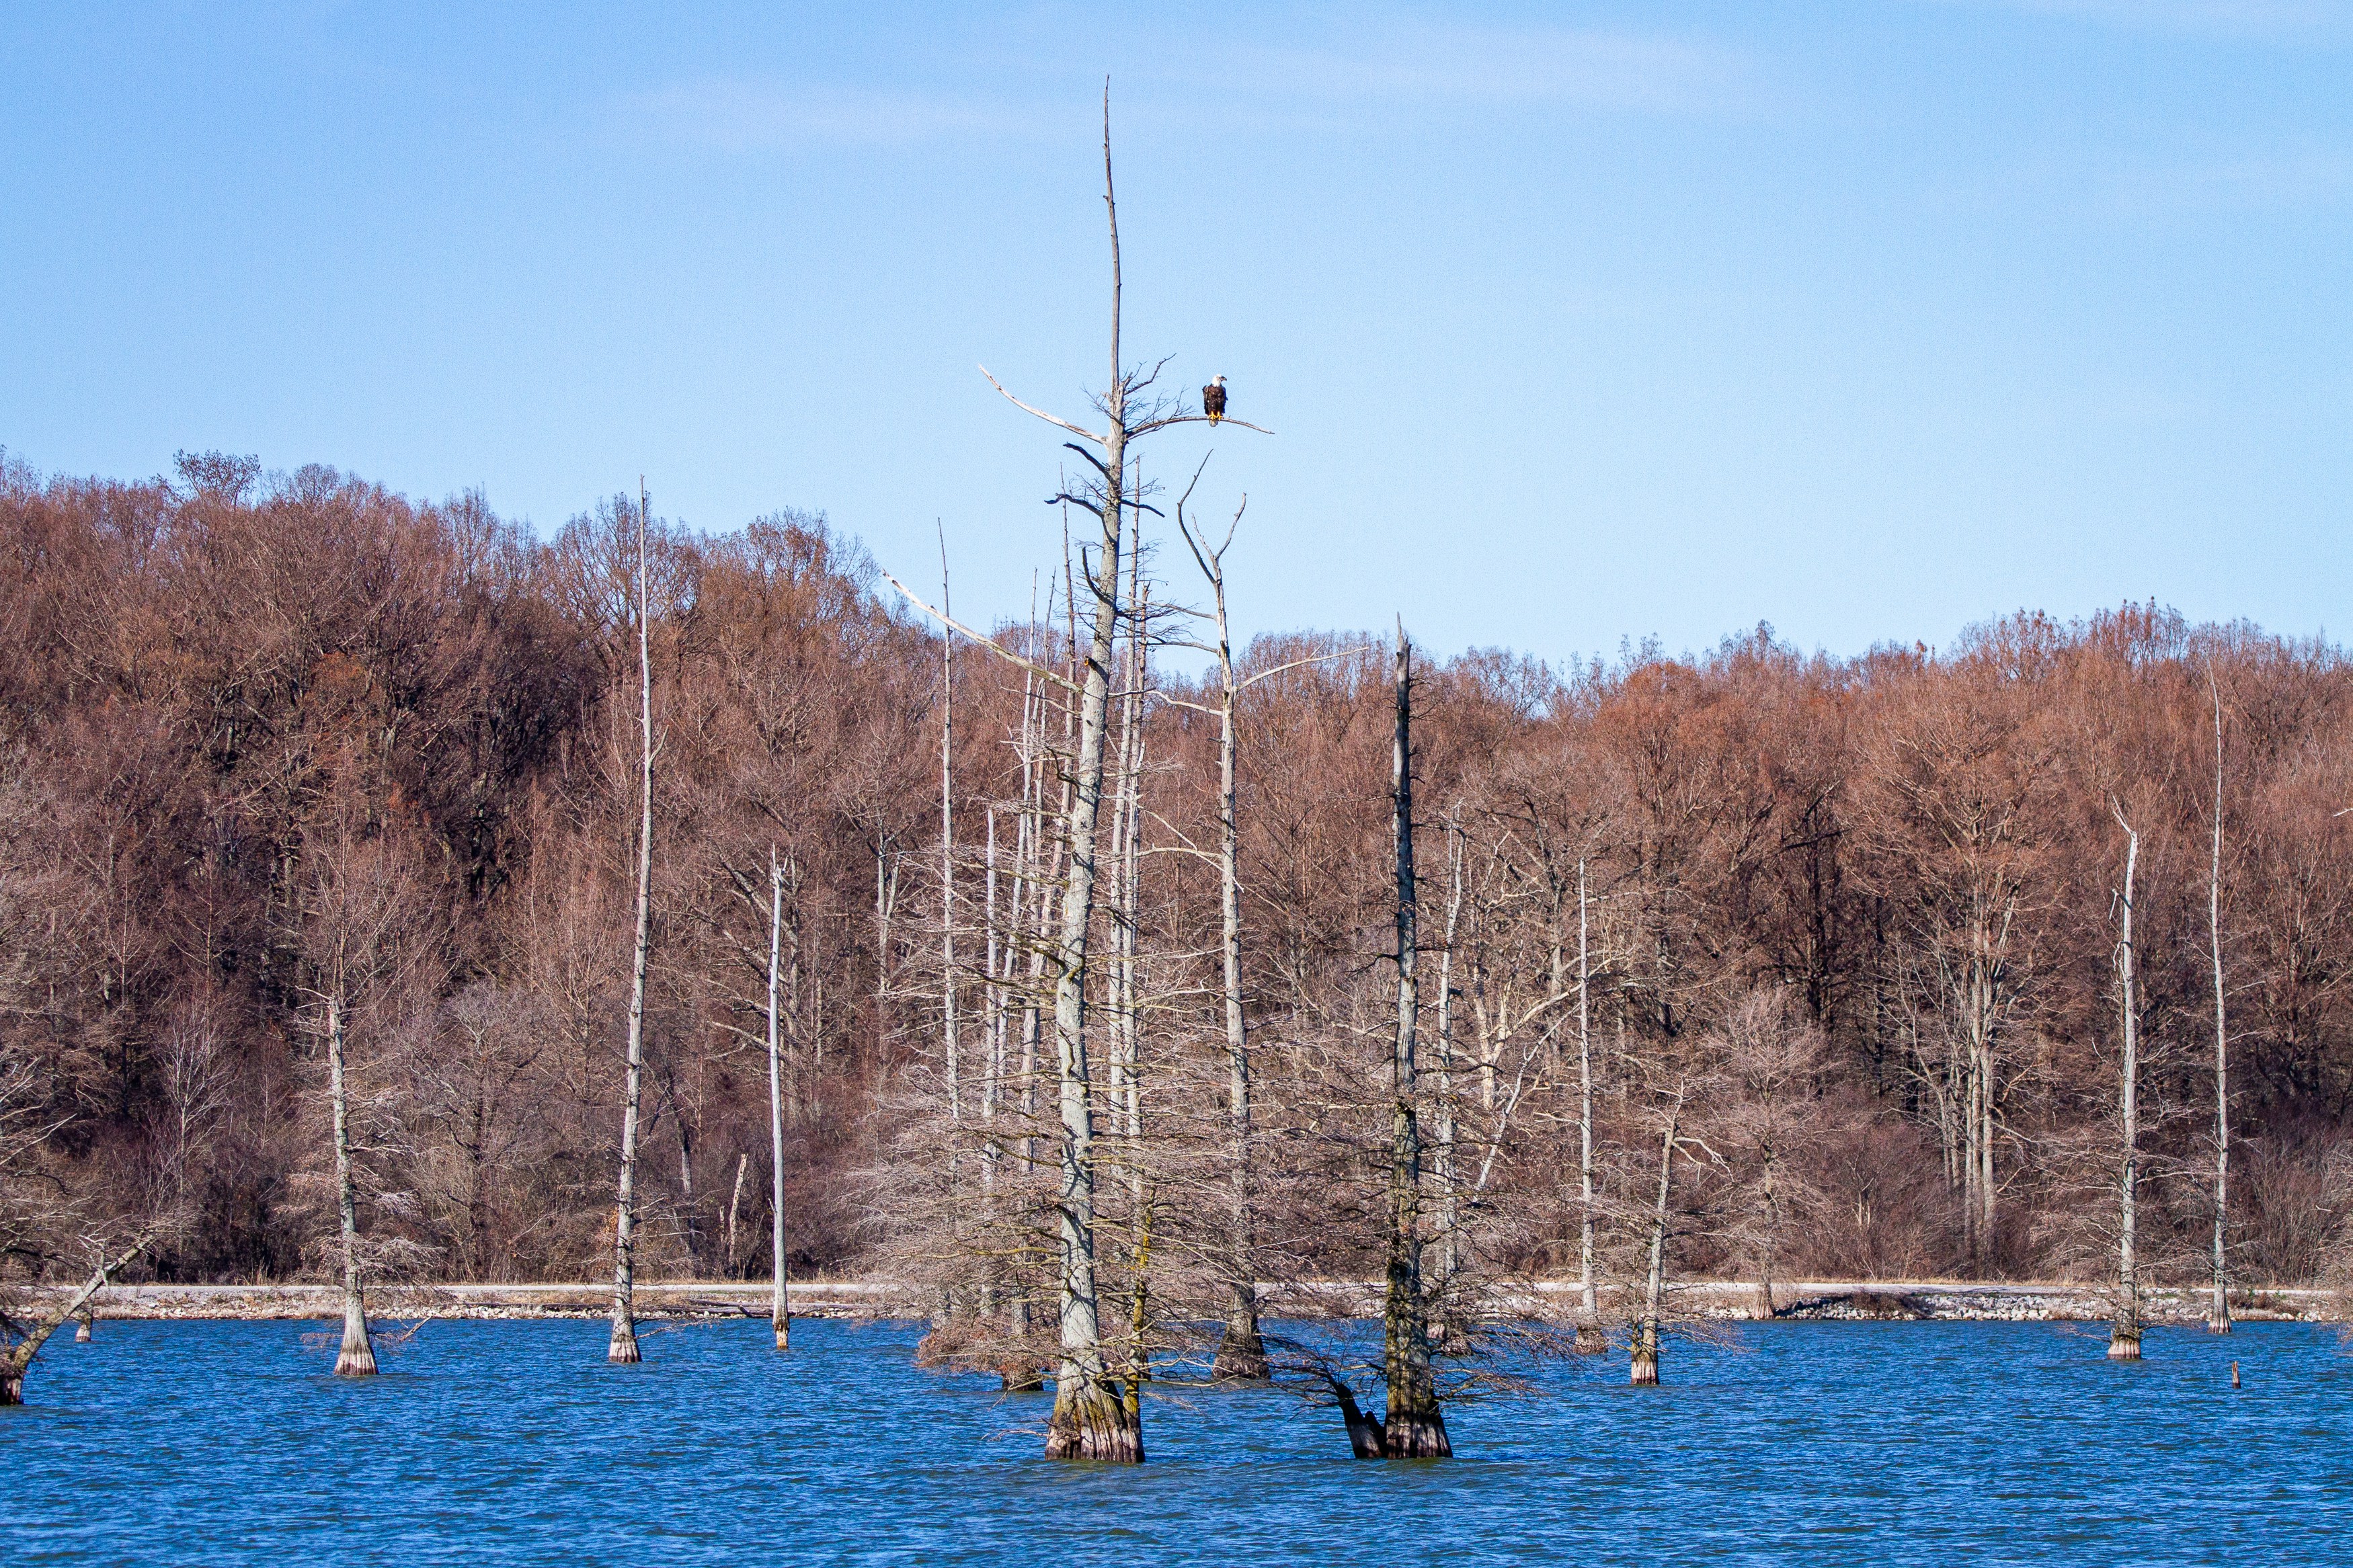 A bald eagle perched at the top of the cypress tree in the middle of a lake.